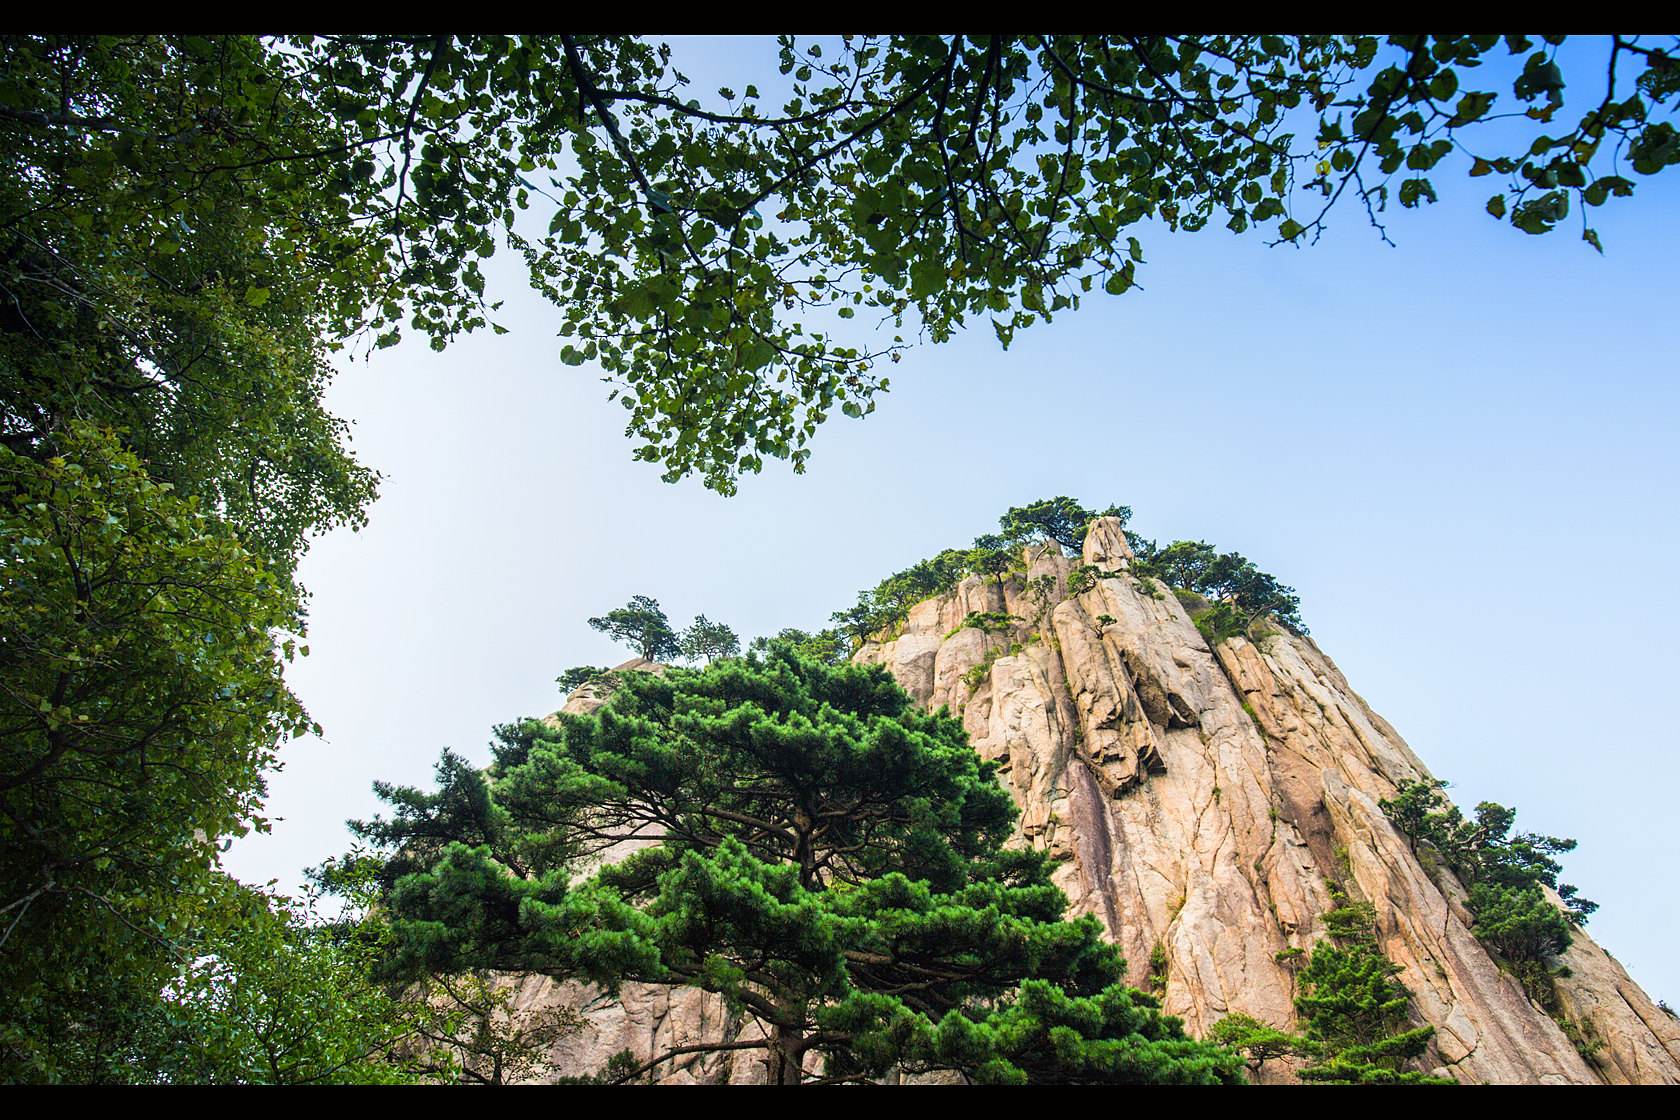 3-Day_Beijing_Huangshan_Sightseeing_Tour_with_Round-trip_High-speed_Train_2.jpg